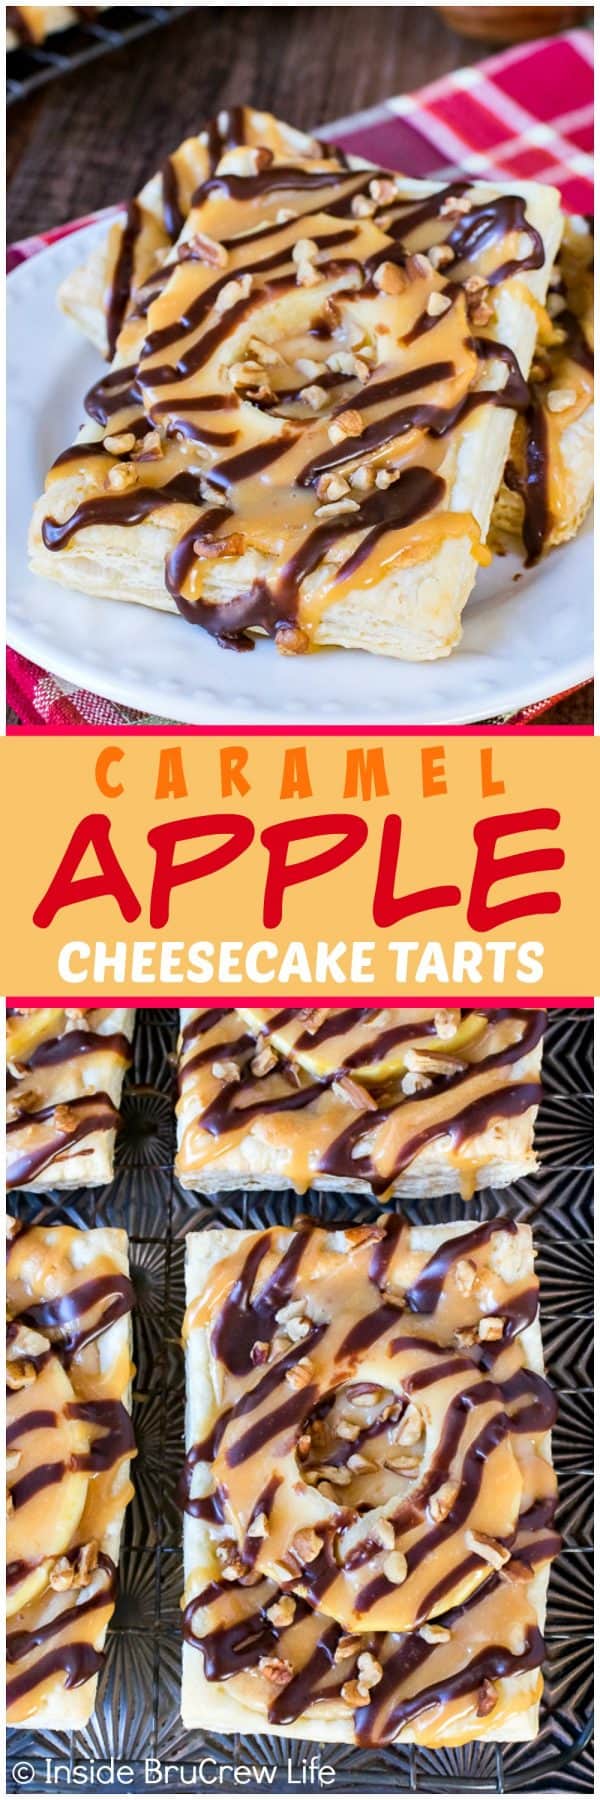 Caramel Apple Cheesecake Tarts - this easy pastry is loaded with cheesecake, apple, and caramel goodness. Awesome recipe to make for fall breakfast or dessert!!!